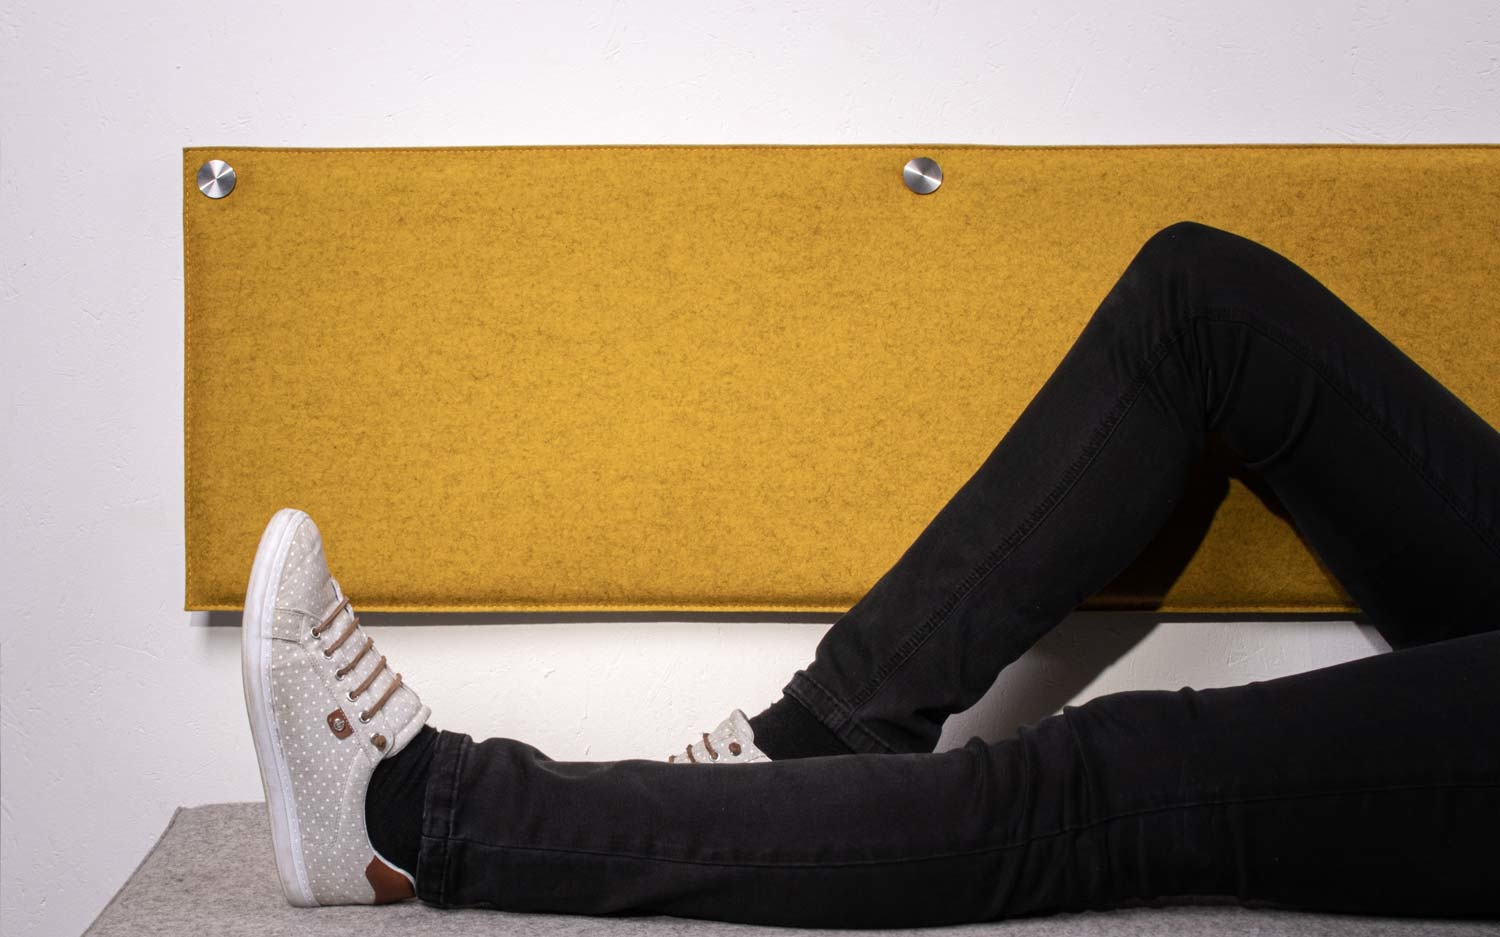 Wall pillow with legs of person lying down